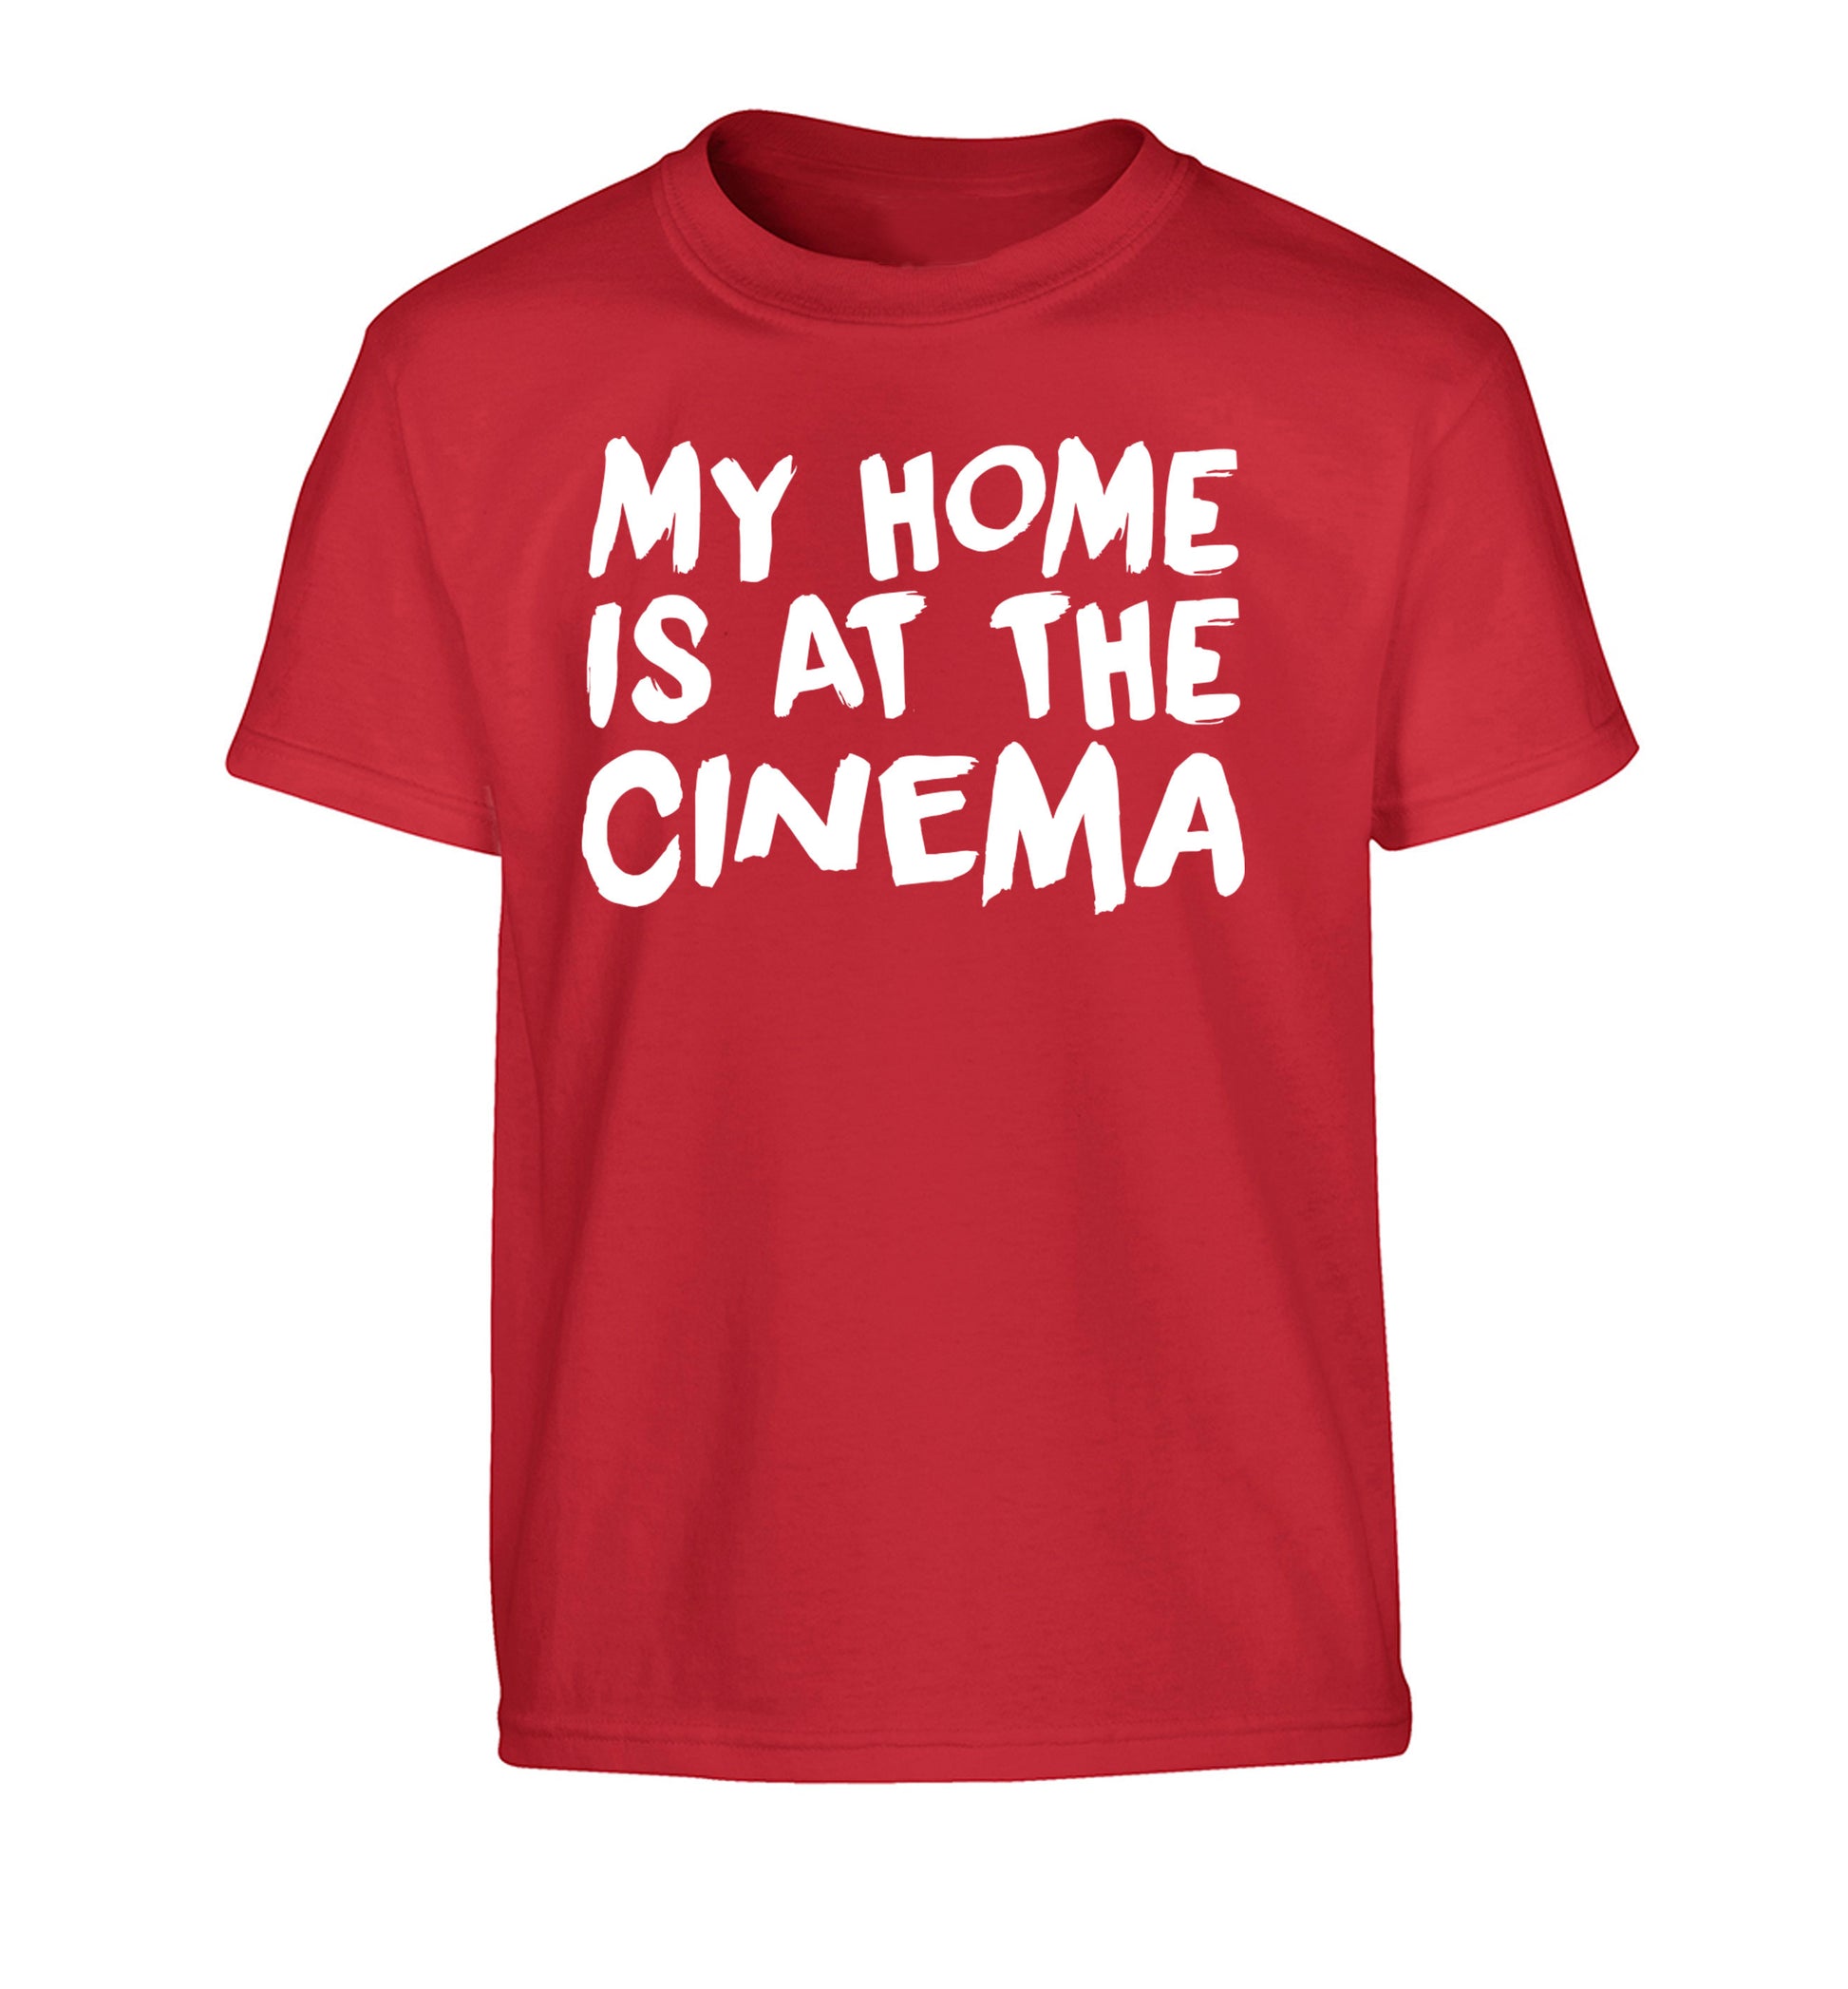 My home is at the cinema Children's red Tshirt 12-14 Years